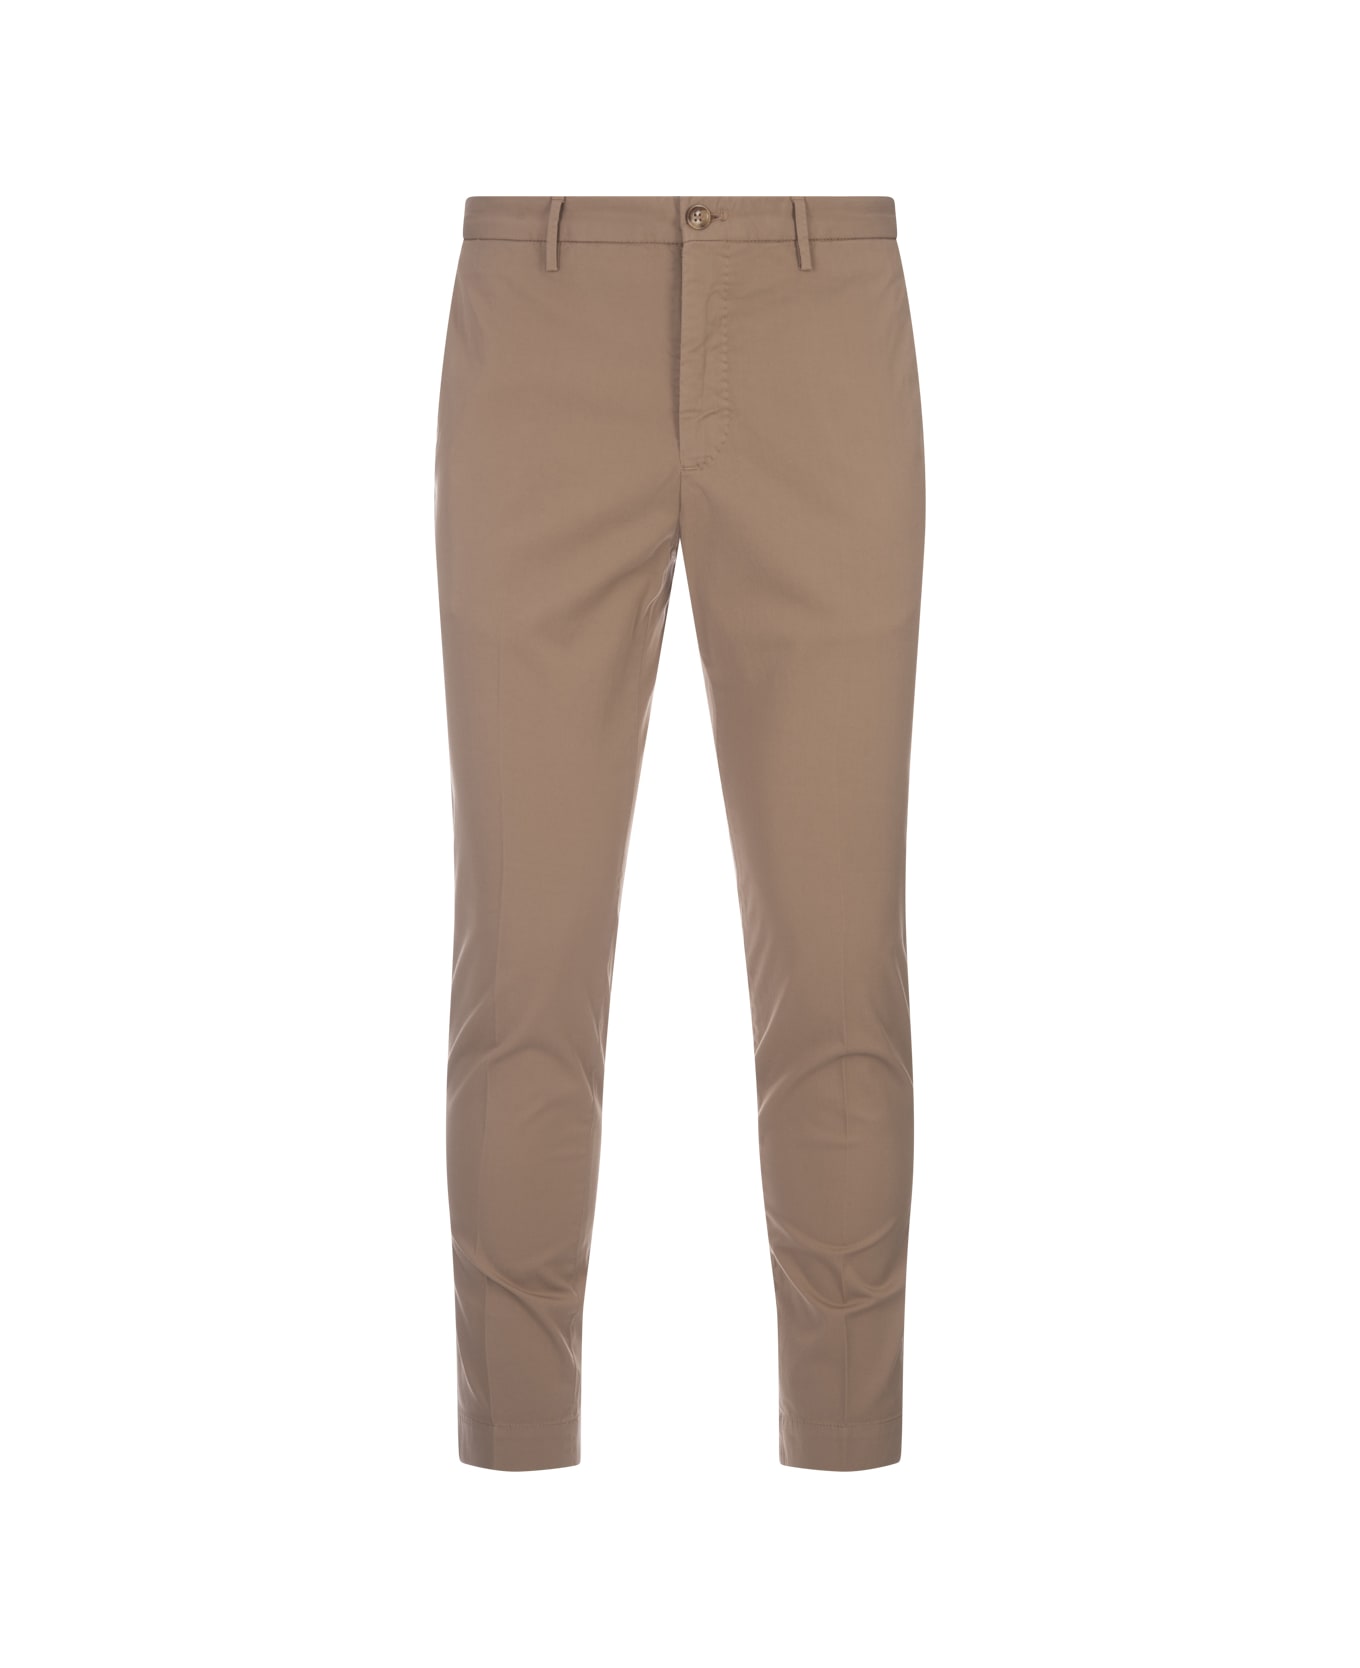 Incotex Beige Tight Fit Trousers - Brown ボトムス